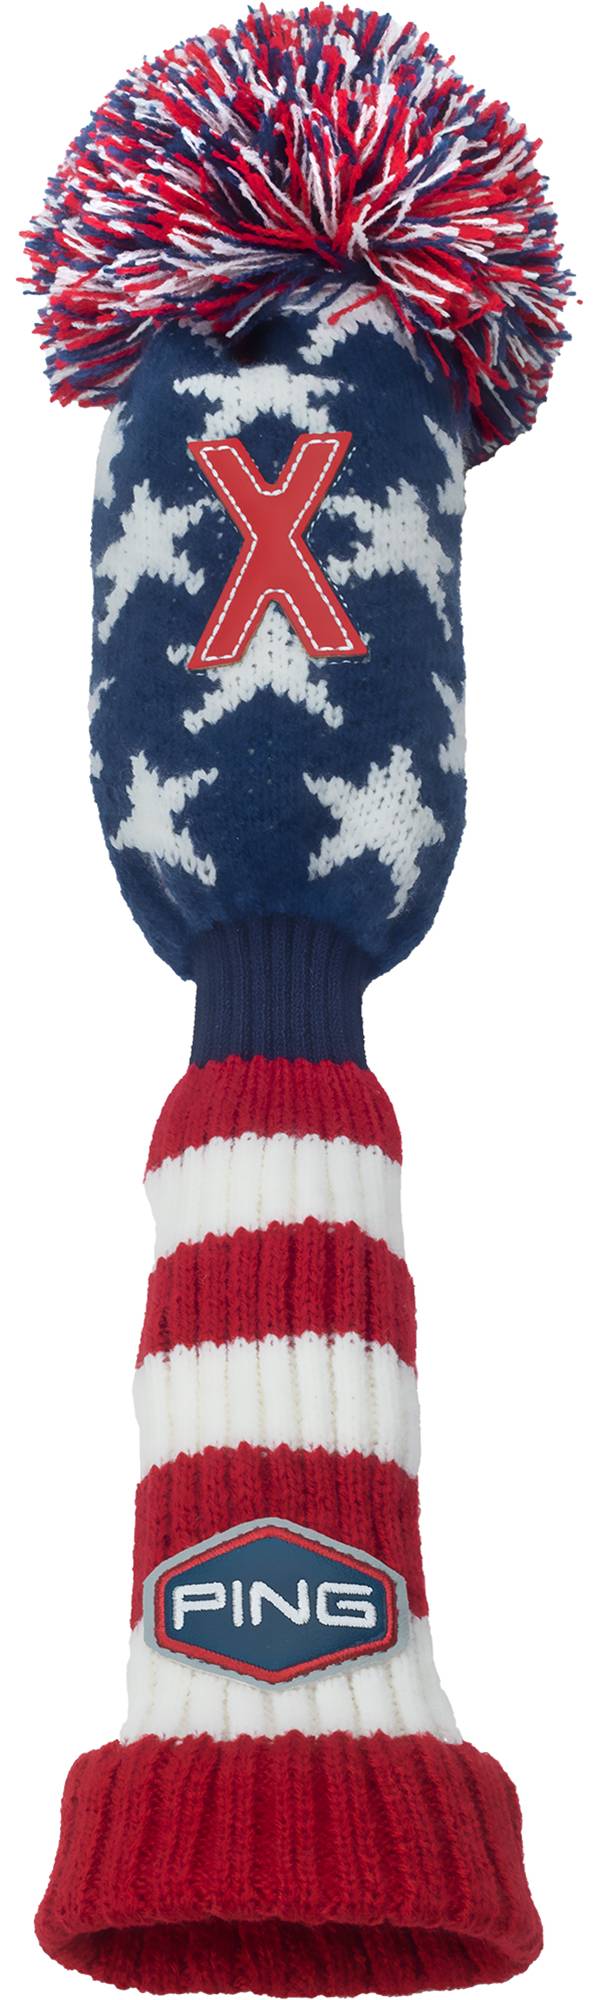 PING Liberty Knit Hybrid Headcover product image